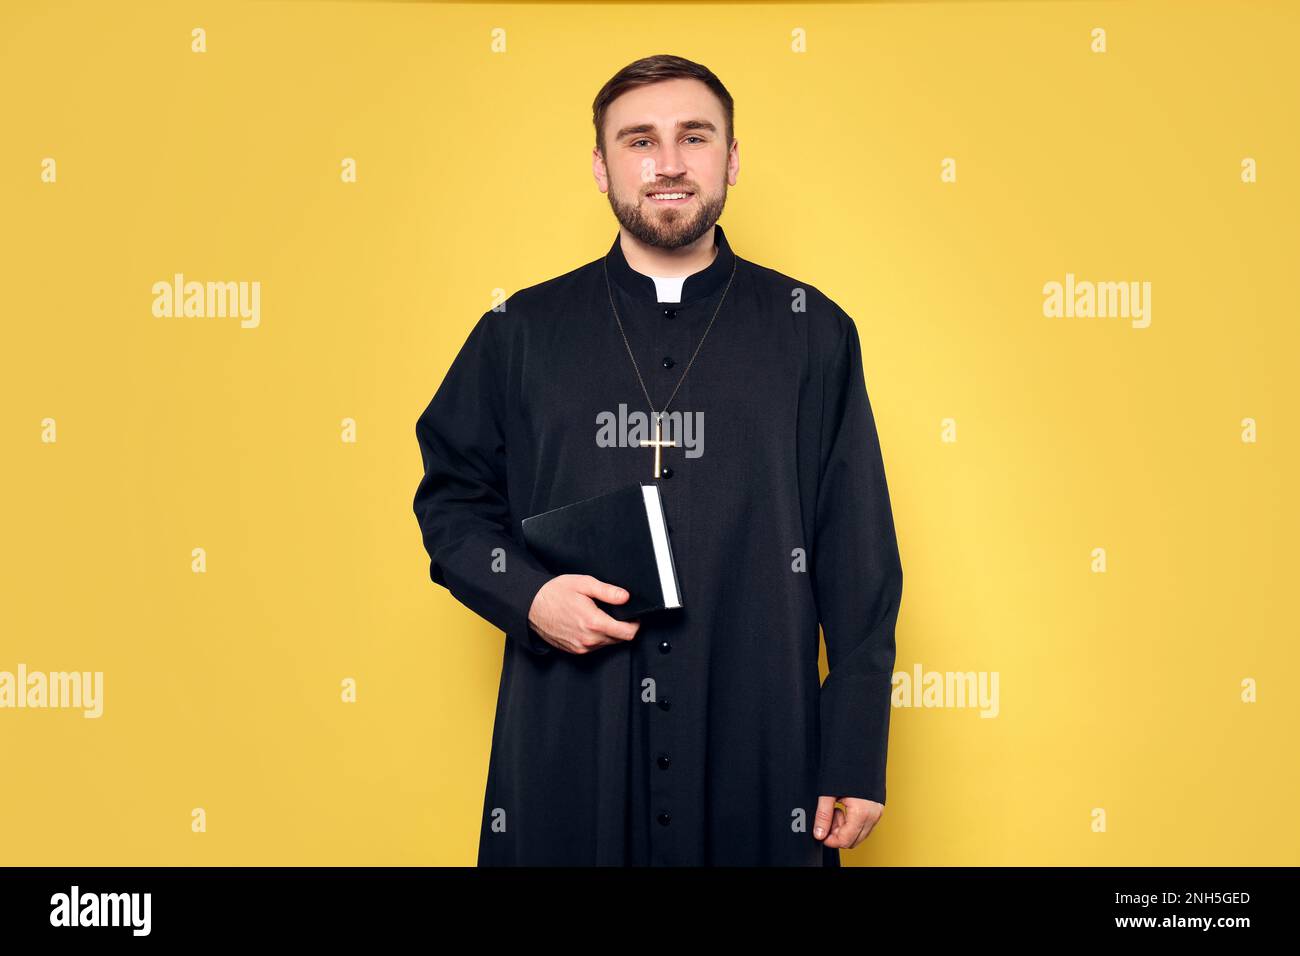 Priest in cassock with Bible on yellow background Stock Photo